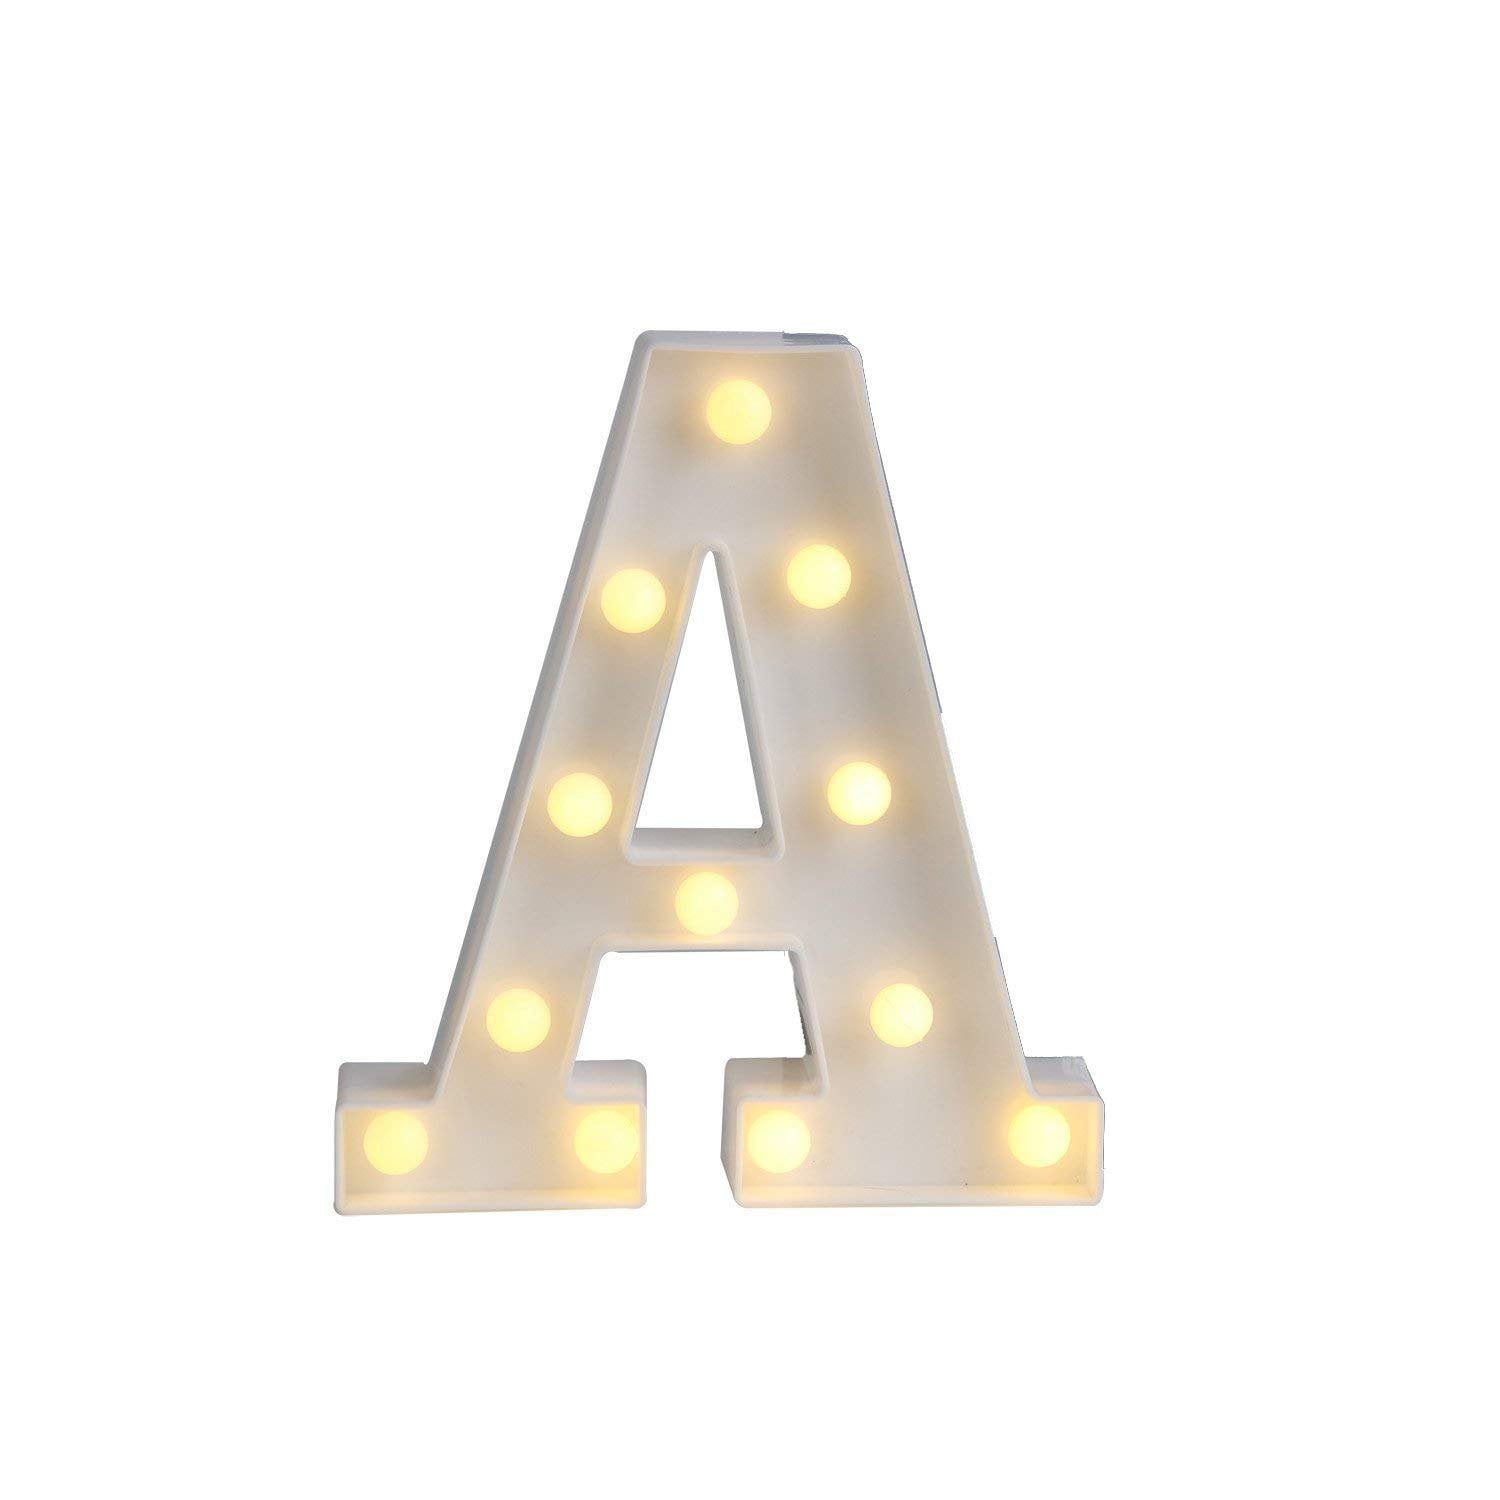 Large LED Light Up Letters ‘PARTY’ Vintage Retro Decor Sign With Retro Style 